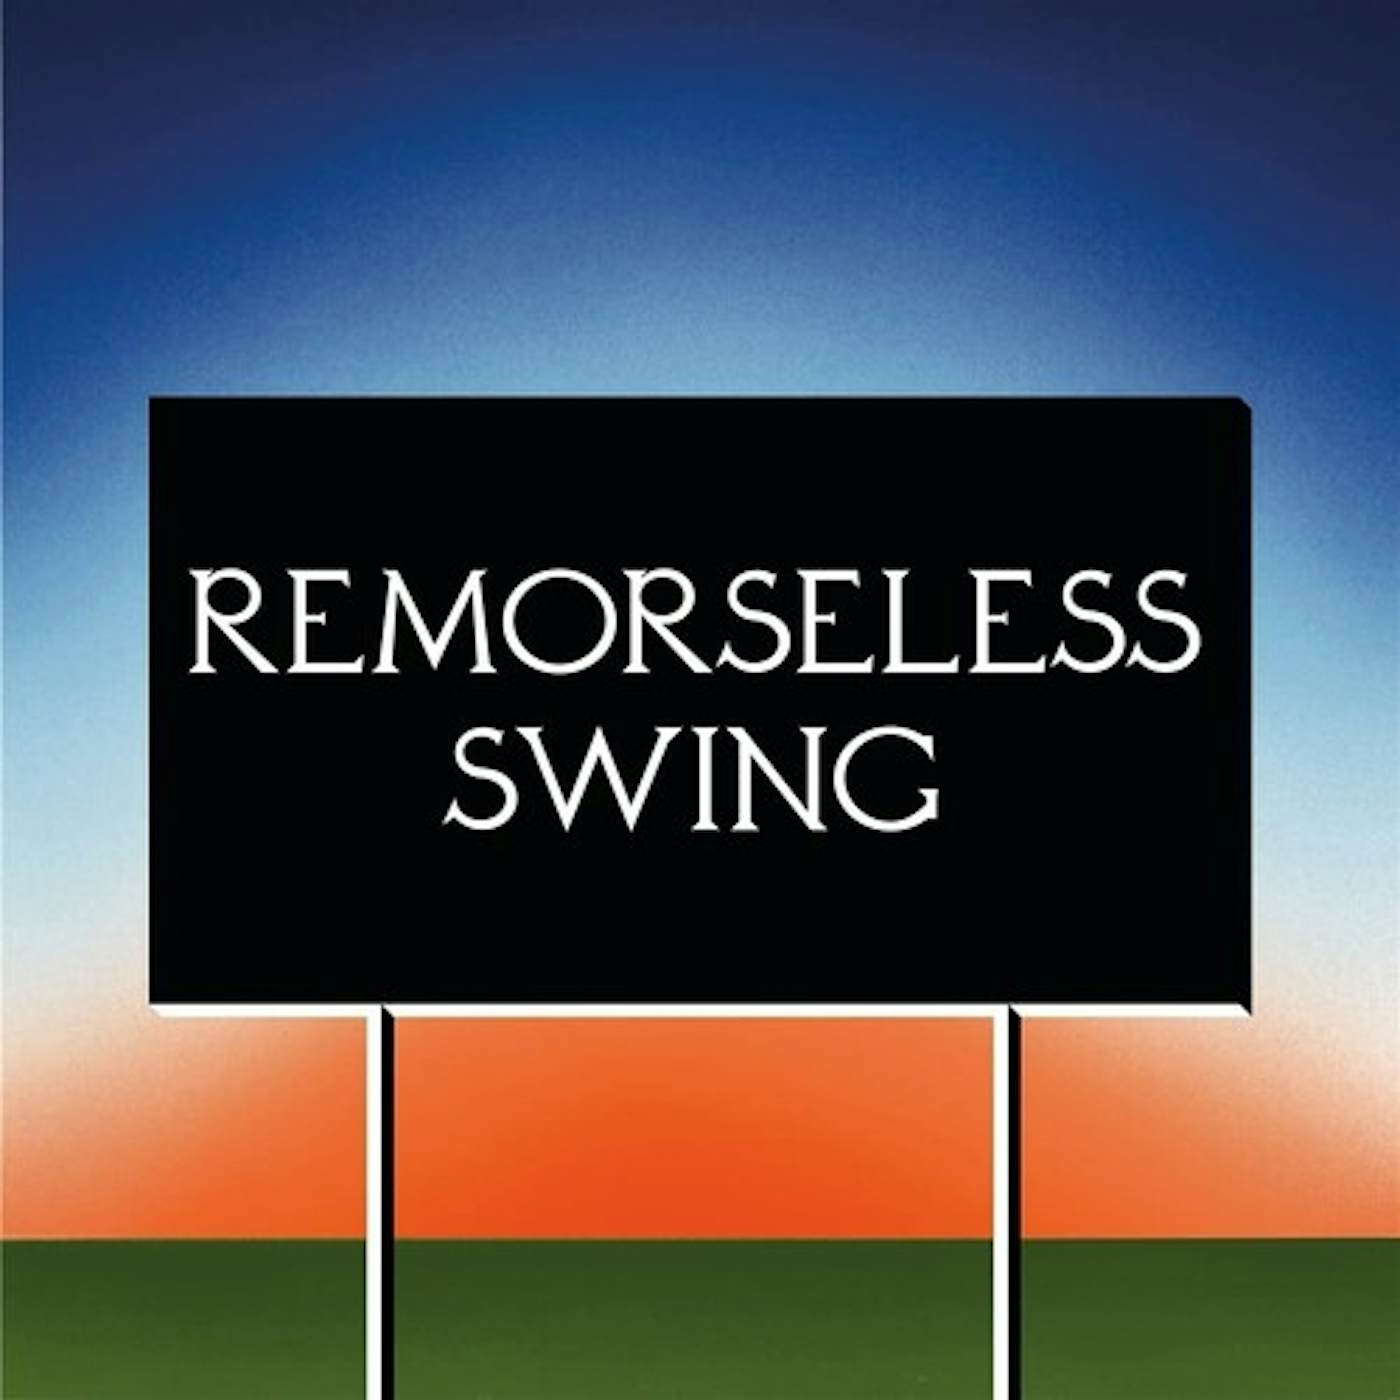 Don't Worry Remorseless Swing Vinyl Record